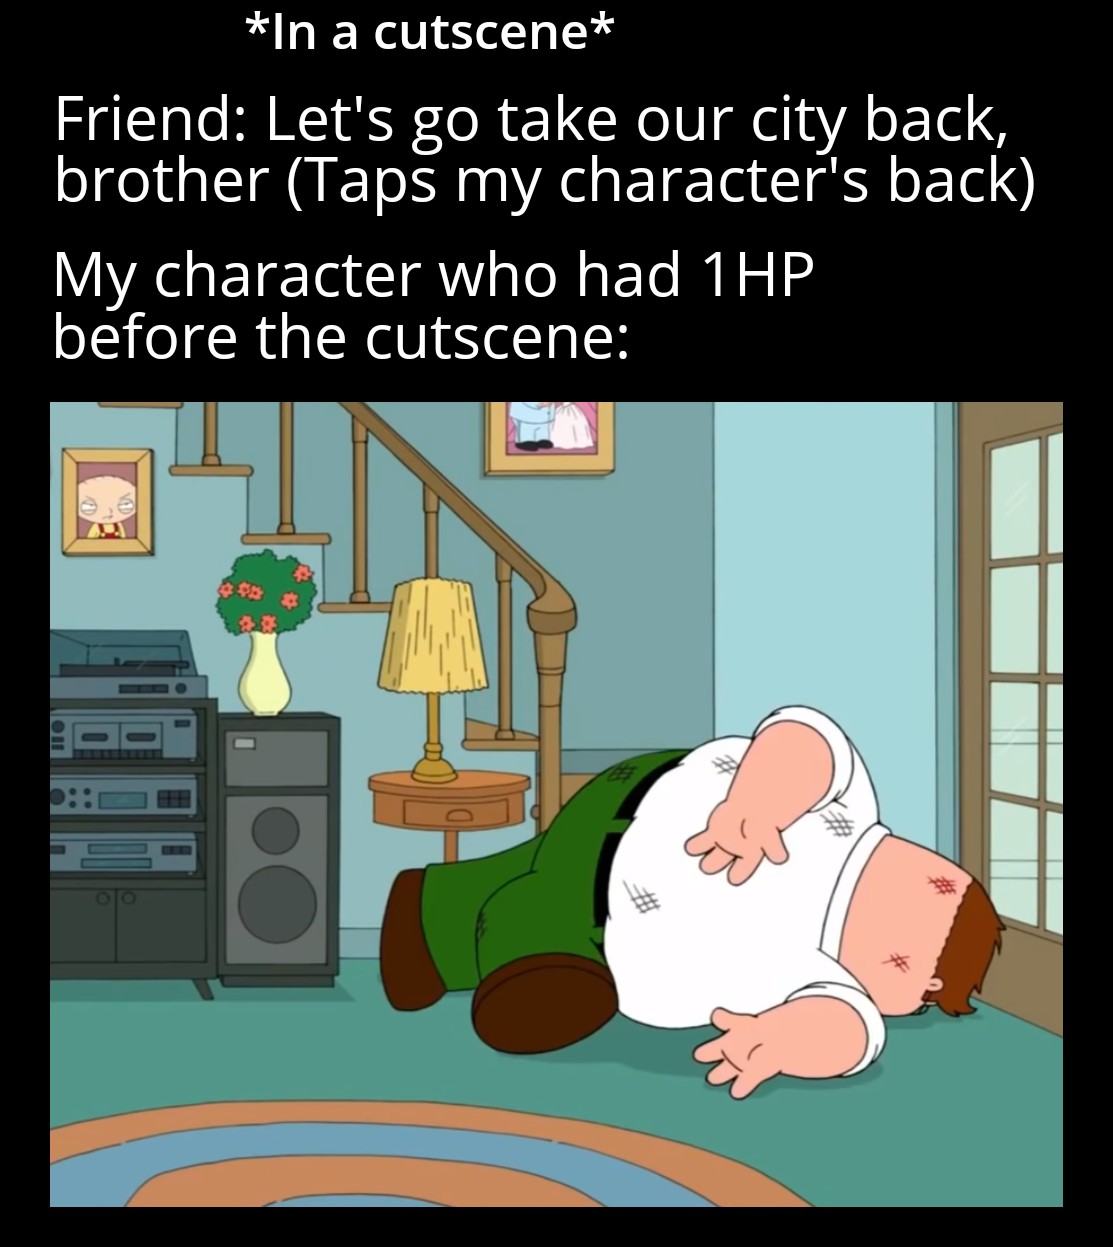 funny gaming memes - family guy death pose meme - In a cutscene Friend Let's go take our city back, brother Taps my character's back My character who had 1HP before the cutscene